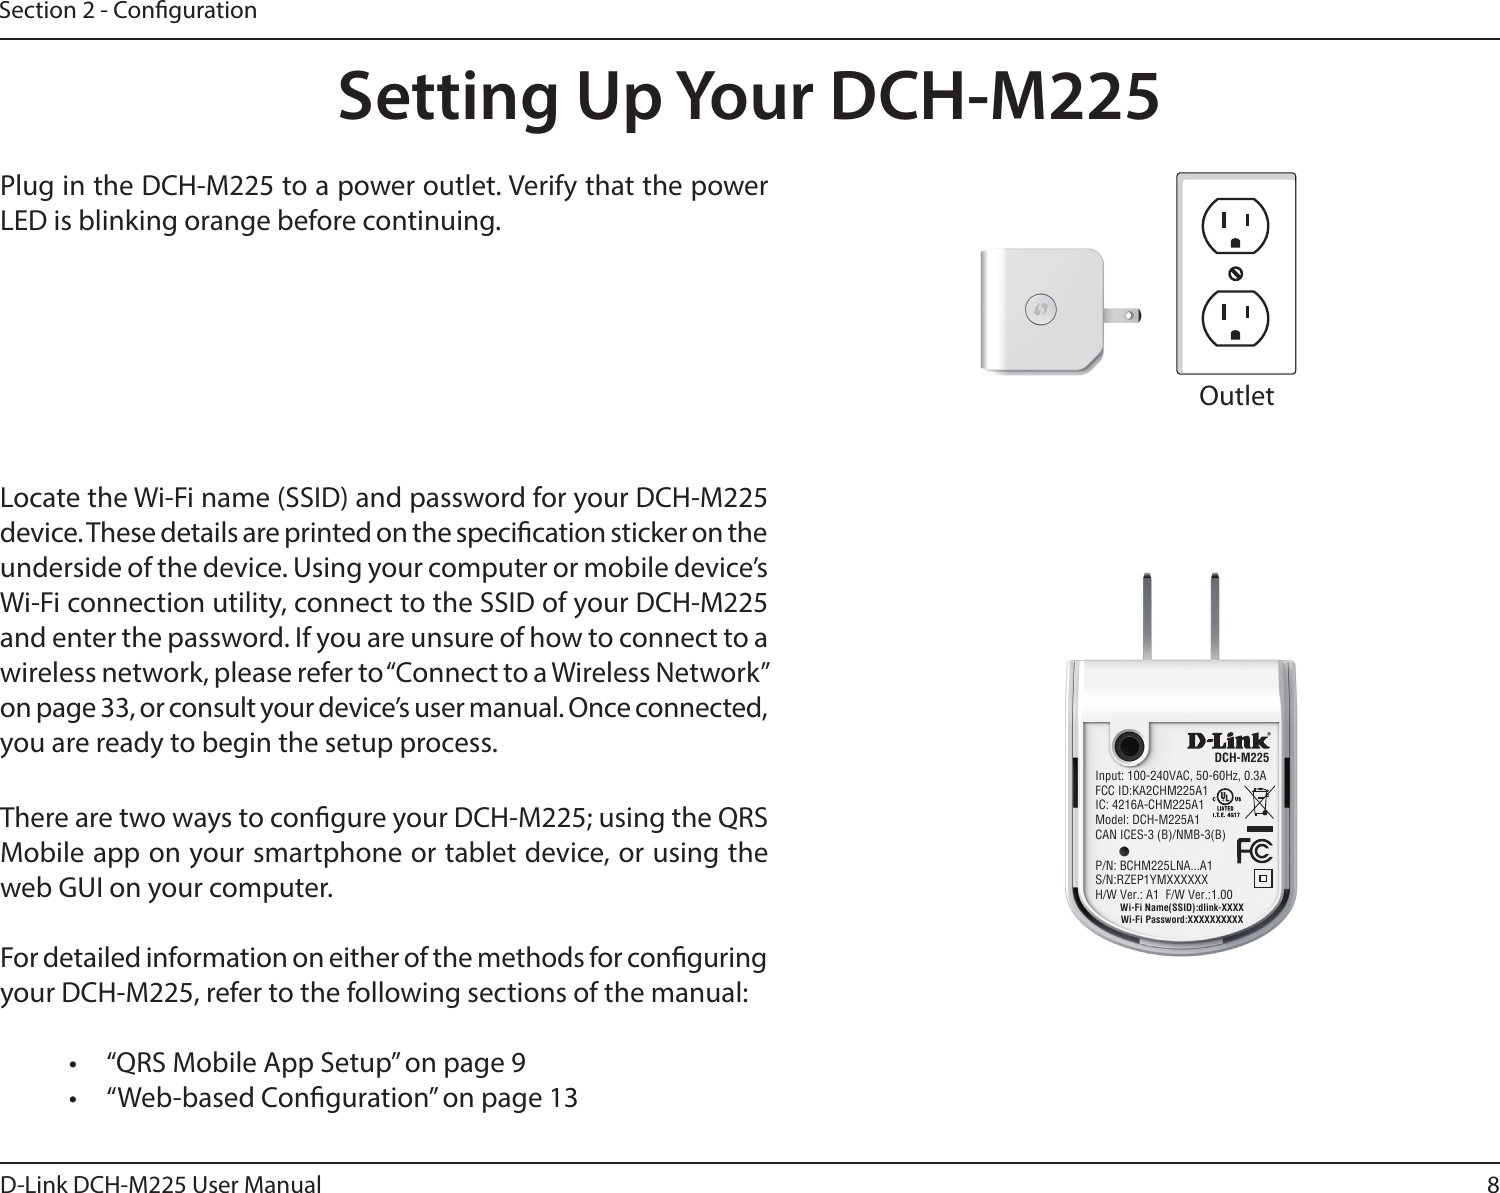 8D-Link DCH-M225 User ManualSection 2 - CongurationSetting Up Your DCH-M225Plug in the DCH-M225 to a power outlet. Verify that the power LED is blinking orange before continuing.OutletEthernetThere are two ways to congure your DCH-M225; using the QRS Mobile app on your smartphone or tablet device, or using the web GUI on your computer.For detailed information on either of the methods for conguring your DCH-M225, refer to the following sections of the manual:•  “QRS Mobile App Setup” on page 9•  “Web-based Conguration” on page 13Locate the Wi-Fi name (SSID) and password for your DCH-M225 device. These details are printed on the specication sticker on the underside of the device. Using your computer or mobile device’s Wi-Fi connection utility, connect to the SSID of your DCH-M225 and enter the password. If you are unsure of how to connect to a wireless network, please refer to “Connect to a Wireless Network” on page 33, or consult your device’s user manual. Once connected, you are ready to begin the setup process. Input: 100-240VAC, 50-60Hz, 0.3AFCC ID:KA2CHM225A1IC: 4216A-CHM225A1Model: DCH-M225A1CAN ICES-3 (B)/NMB-3(B)P/N: BCHM225LNA...A1S/N:RZEP1YMXXXXXXH/W Ver.: A1  F/W Ver.:1.00DCH-M225Wi-Fi Name(SSID):dlink-XXXXWi-Fi Password:XXXXXXXXXX